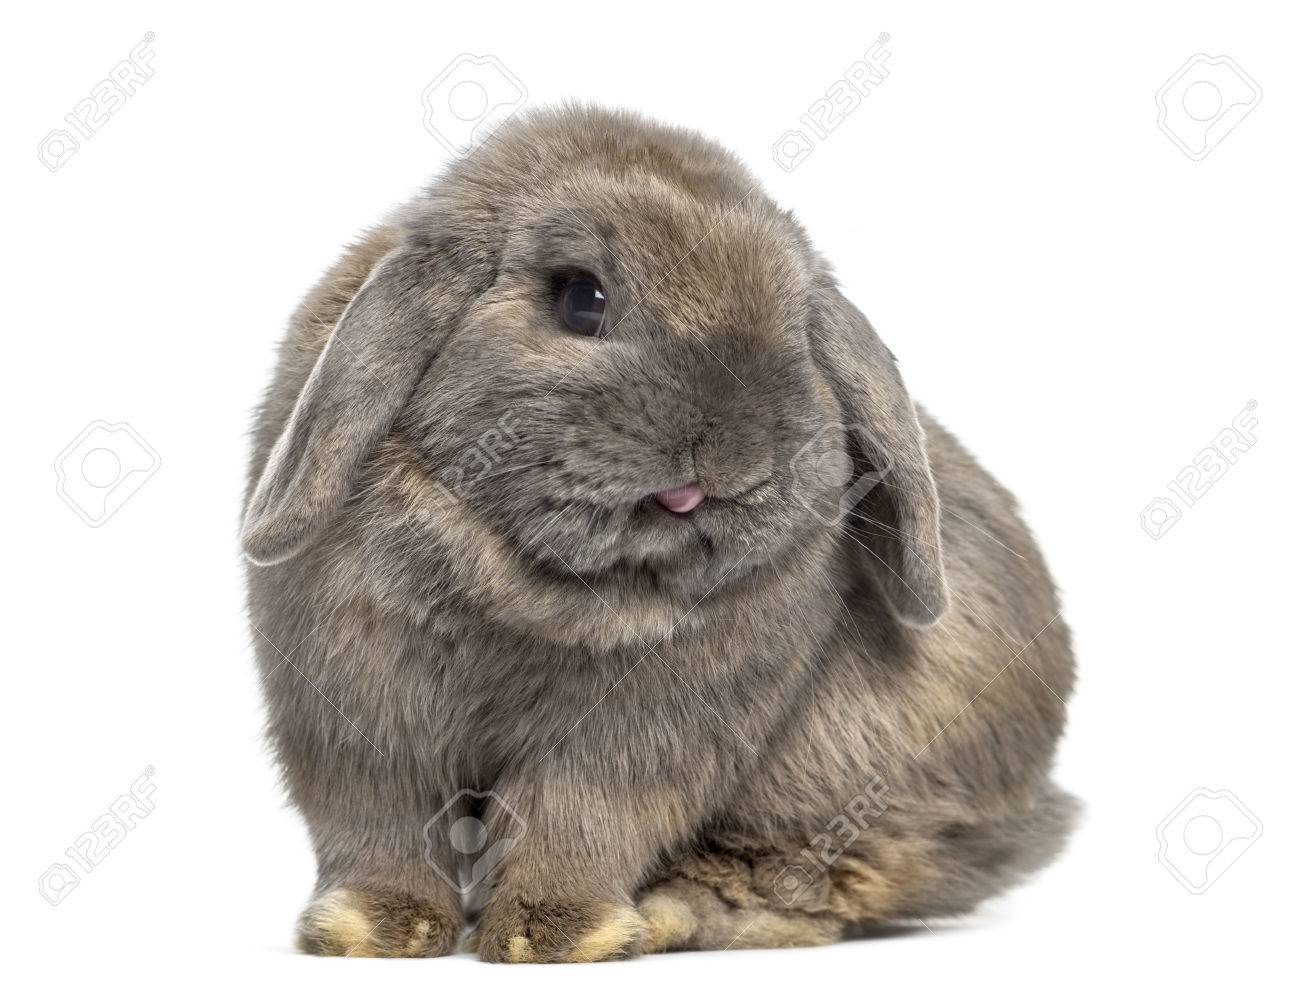 64970749-cute-holland-lop-rabbit-isolated-on-white